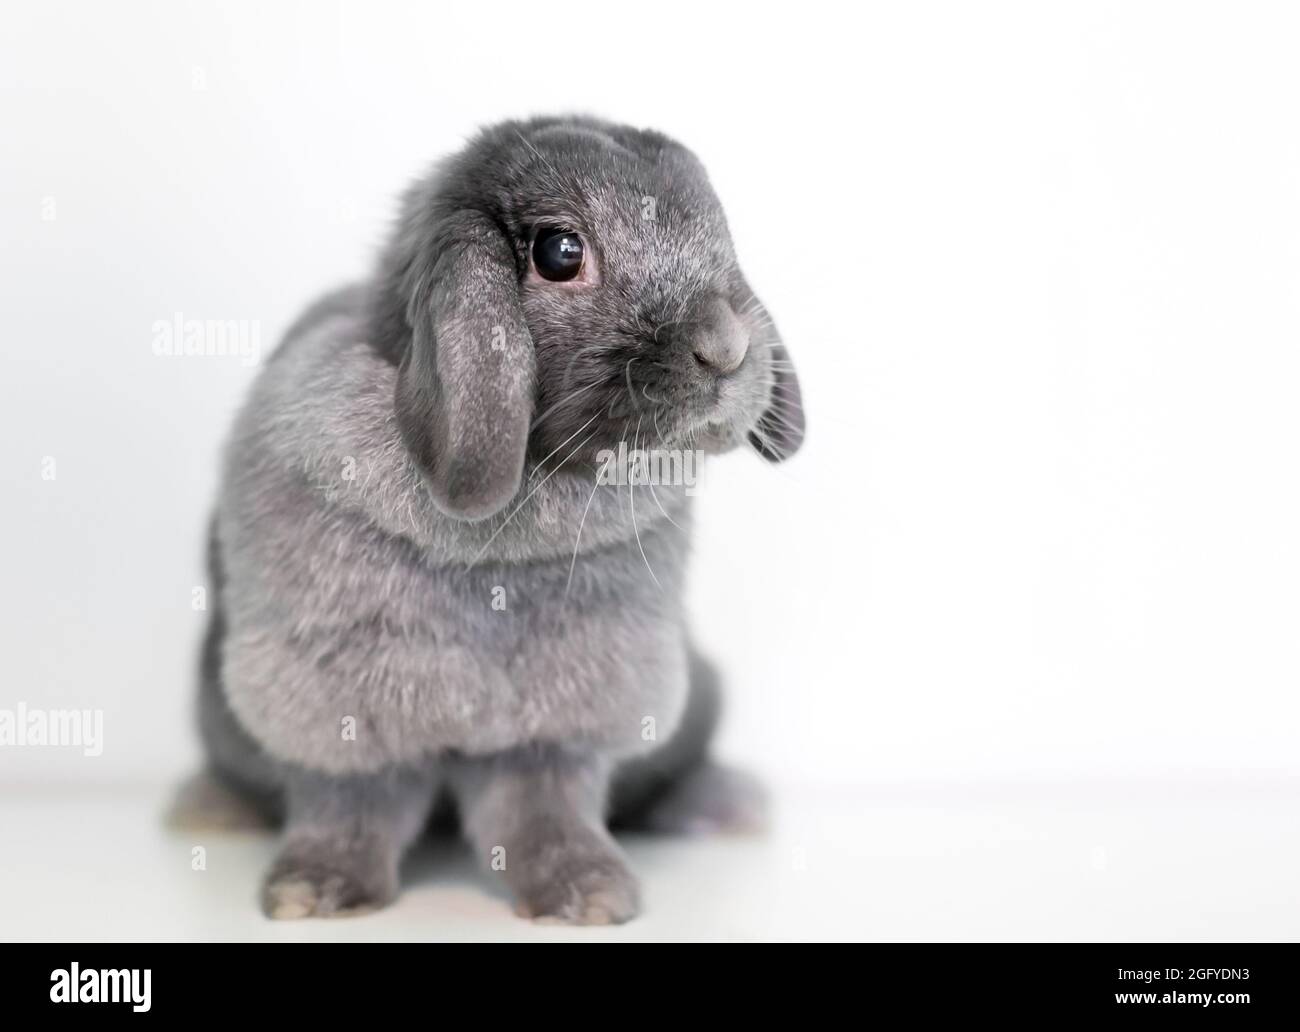 A cute gray Lop rabbit sitting on a white background Stock Photo